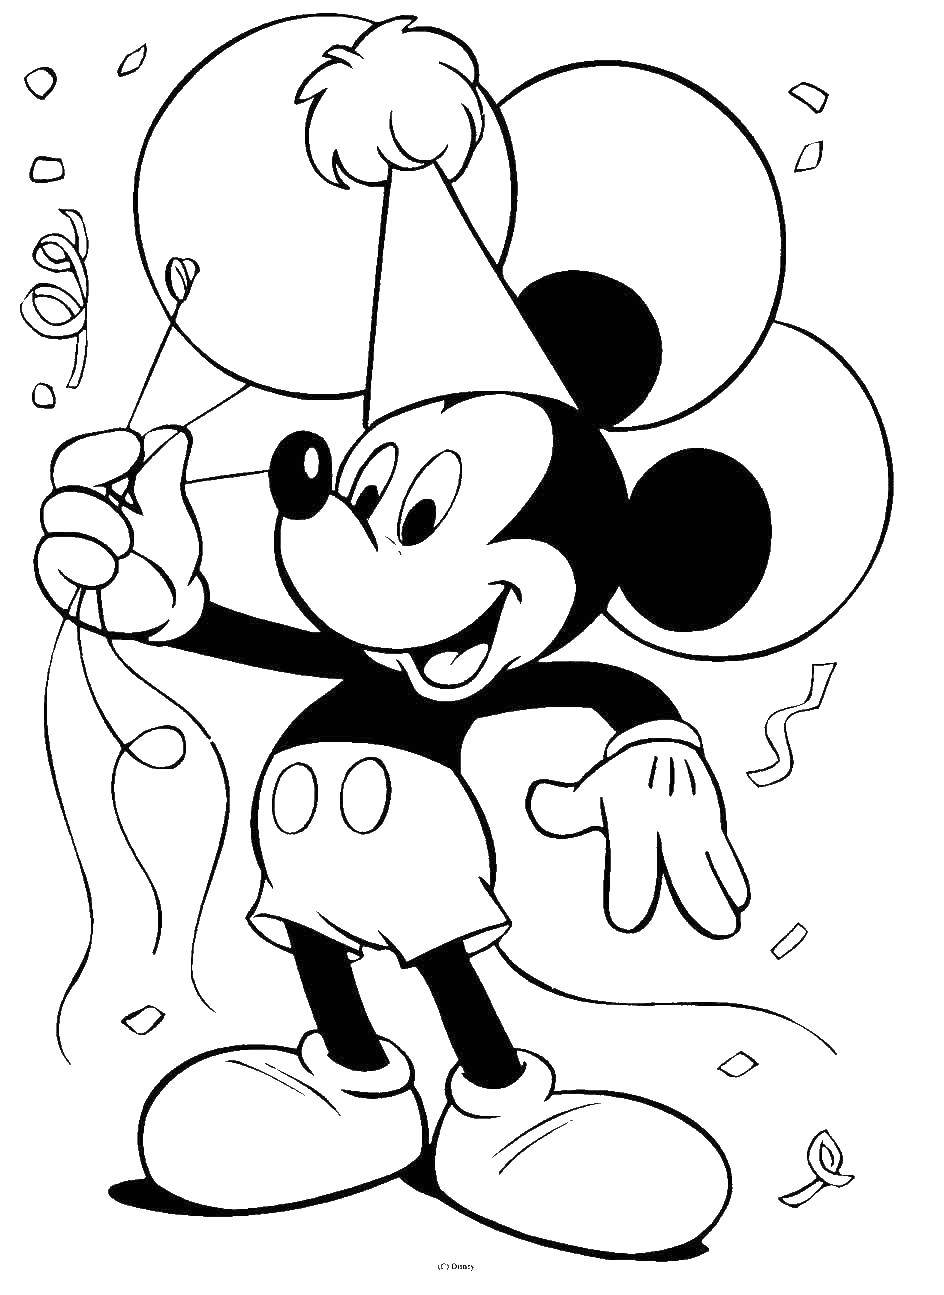 Coloring Festive Mickey mouse. Category Disney cartoons. Tags:  Disney, Mickey Mouse.